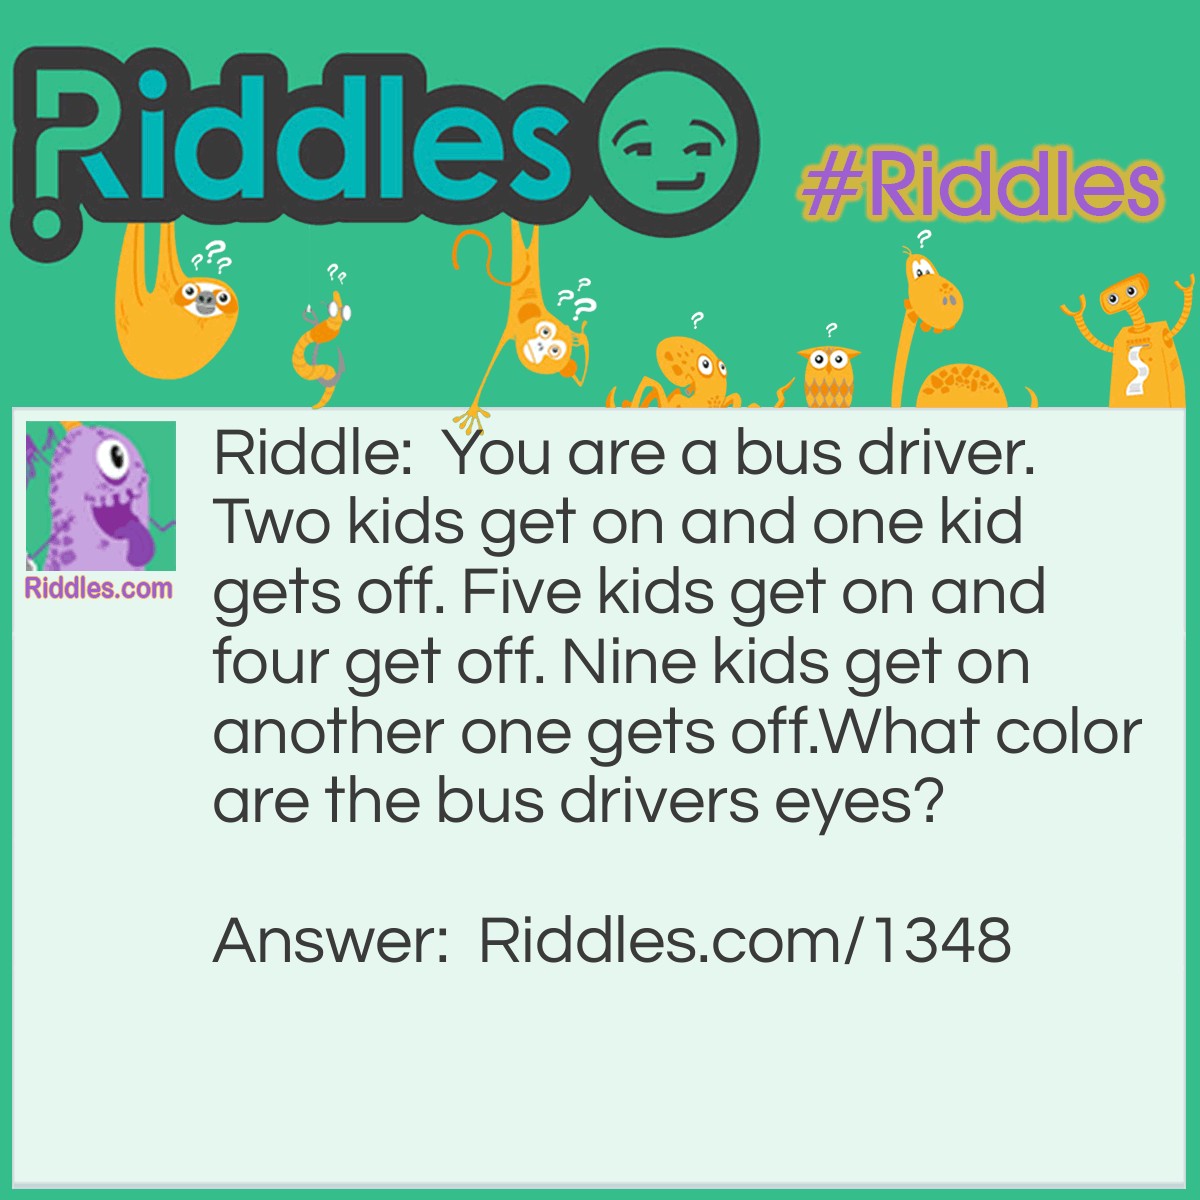 Riddle: You are a bus driver. Two kids get on and one kid gets off. Five kids get on and four get off. Nine kids get on another one gets off.
What color are the bus driver's eyes? Answer: If your eyes are green, the answer is green. If your eyes are brown, the answer is brown, etc.